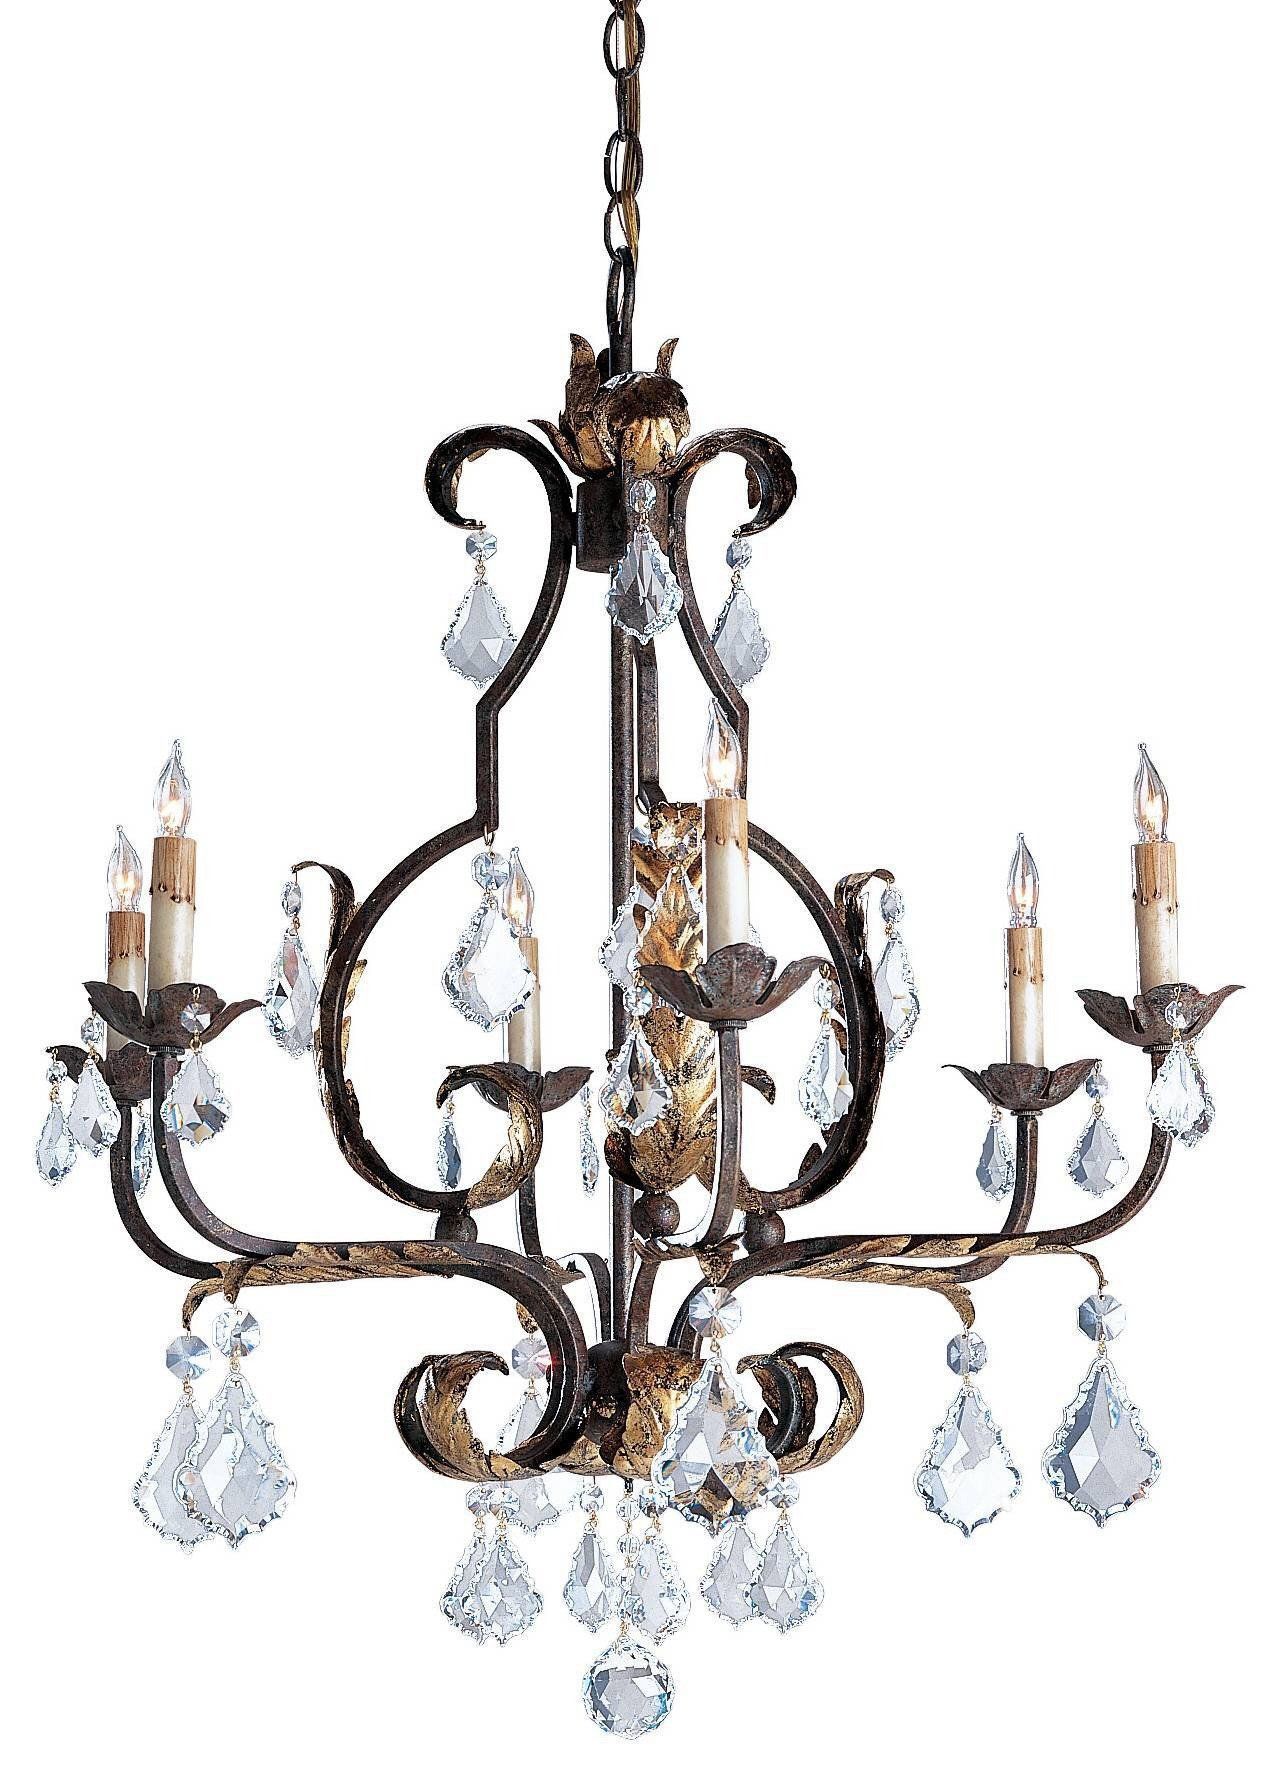 Large Tuscan Chandelier Designcurrey & Company With Regard To Cupertino Chandeliers (View 11 of 15)